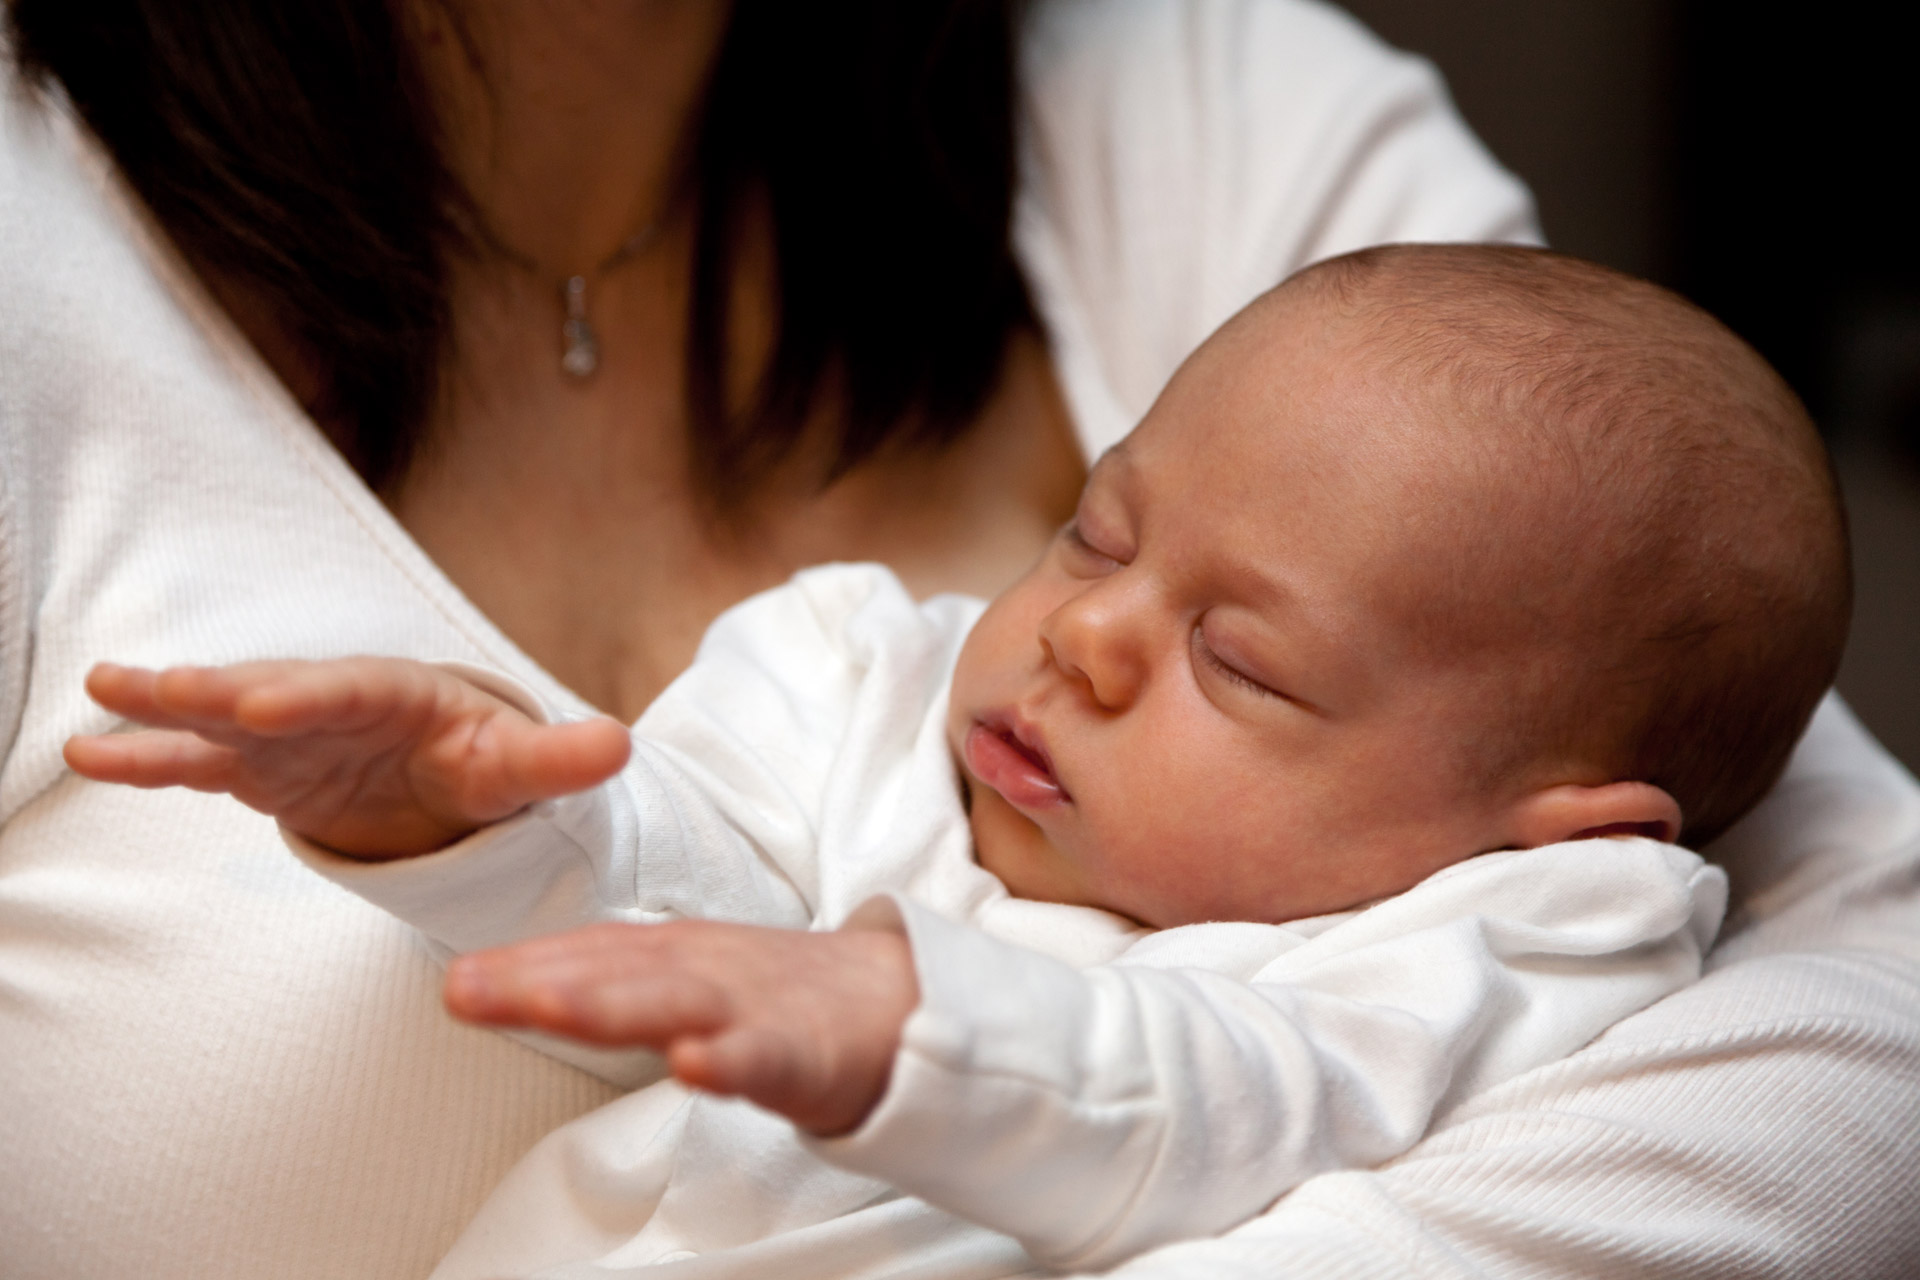 young baby sleeping with his hands in the air